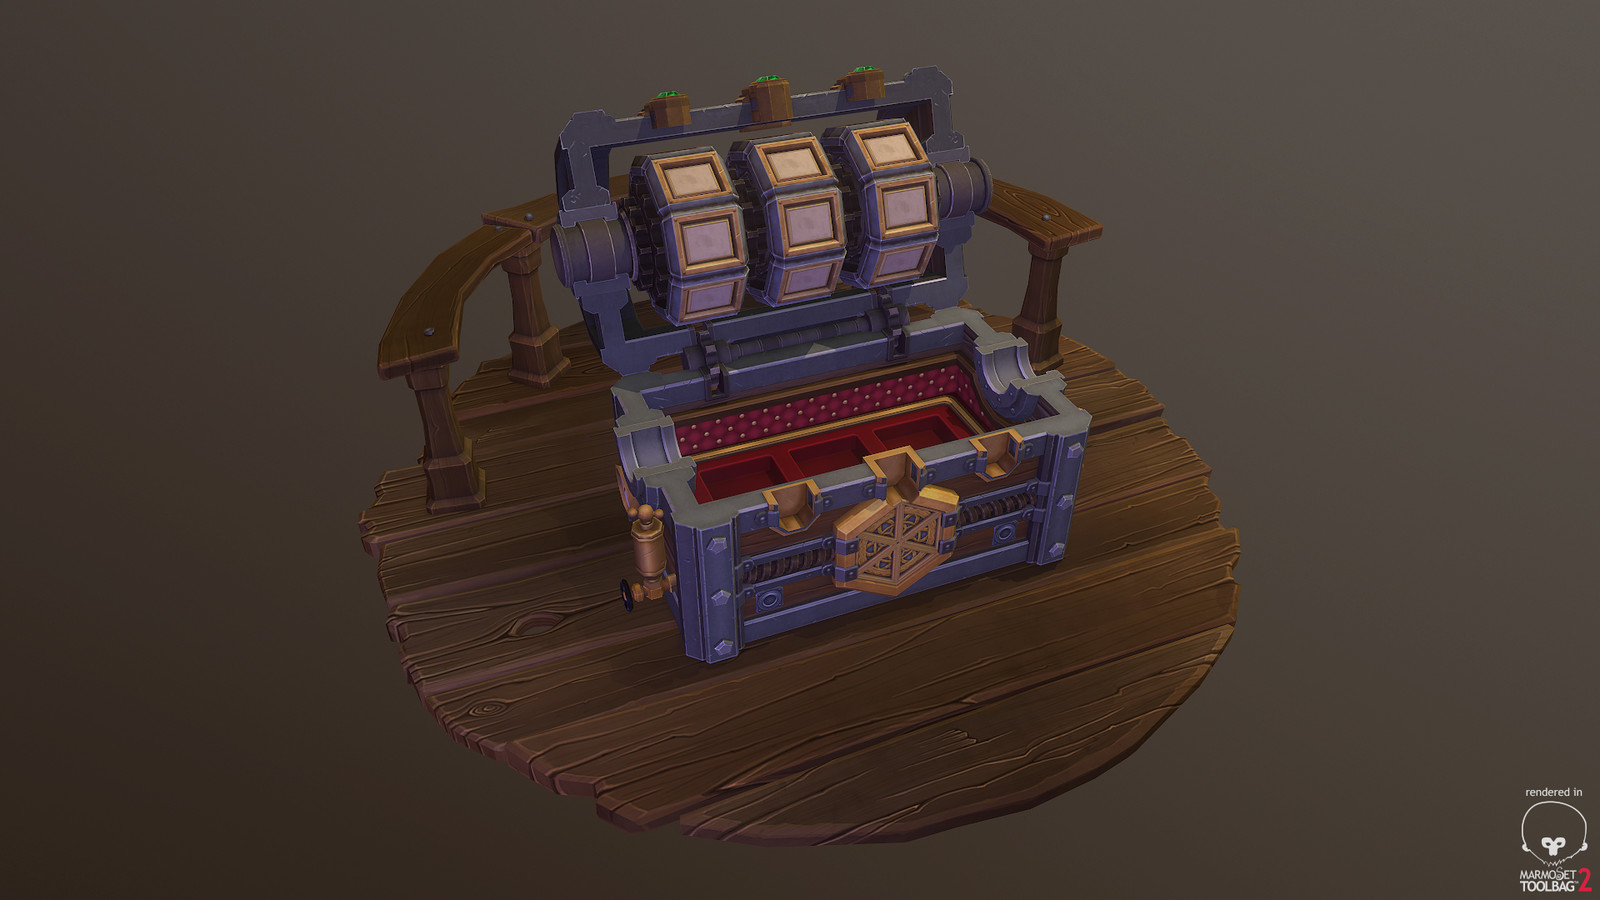 Uber Chest - Stage Two - Tumblers spin, land on symbols and then chest lid opens.